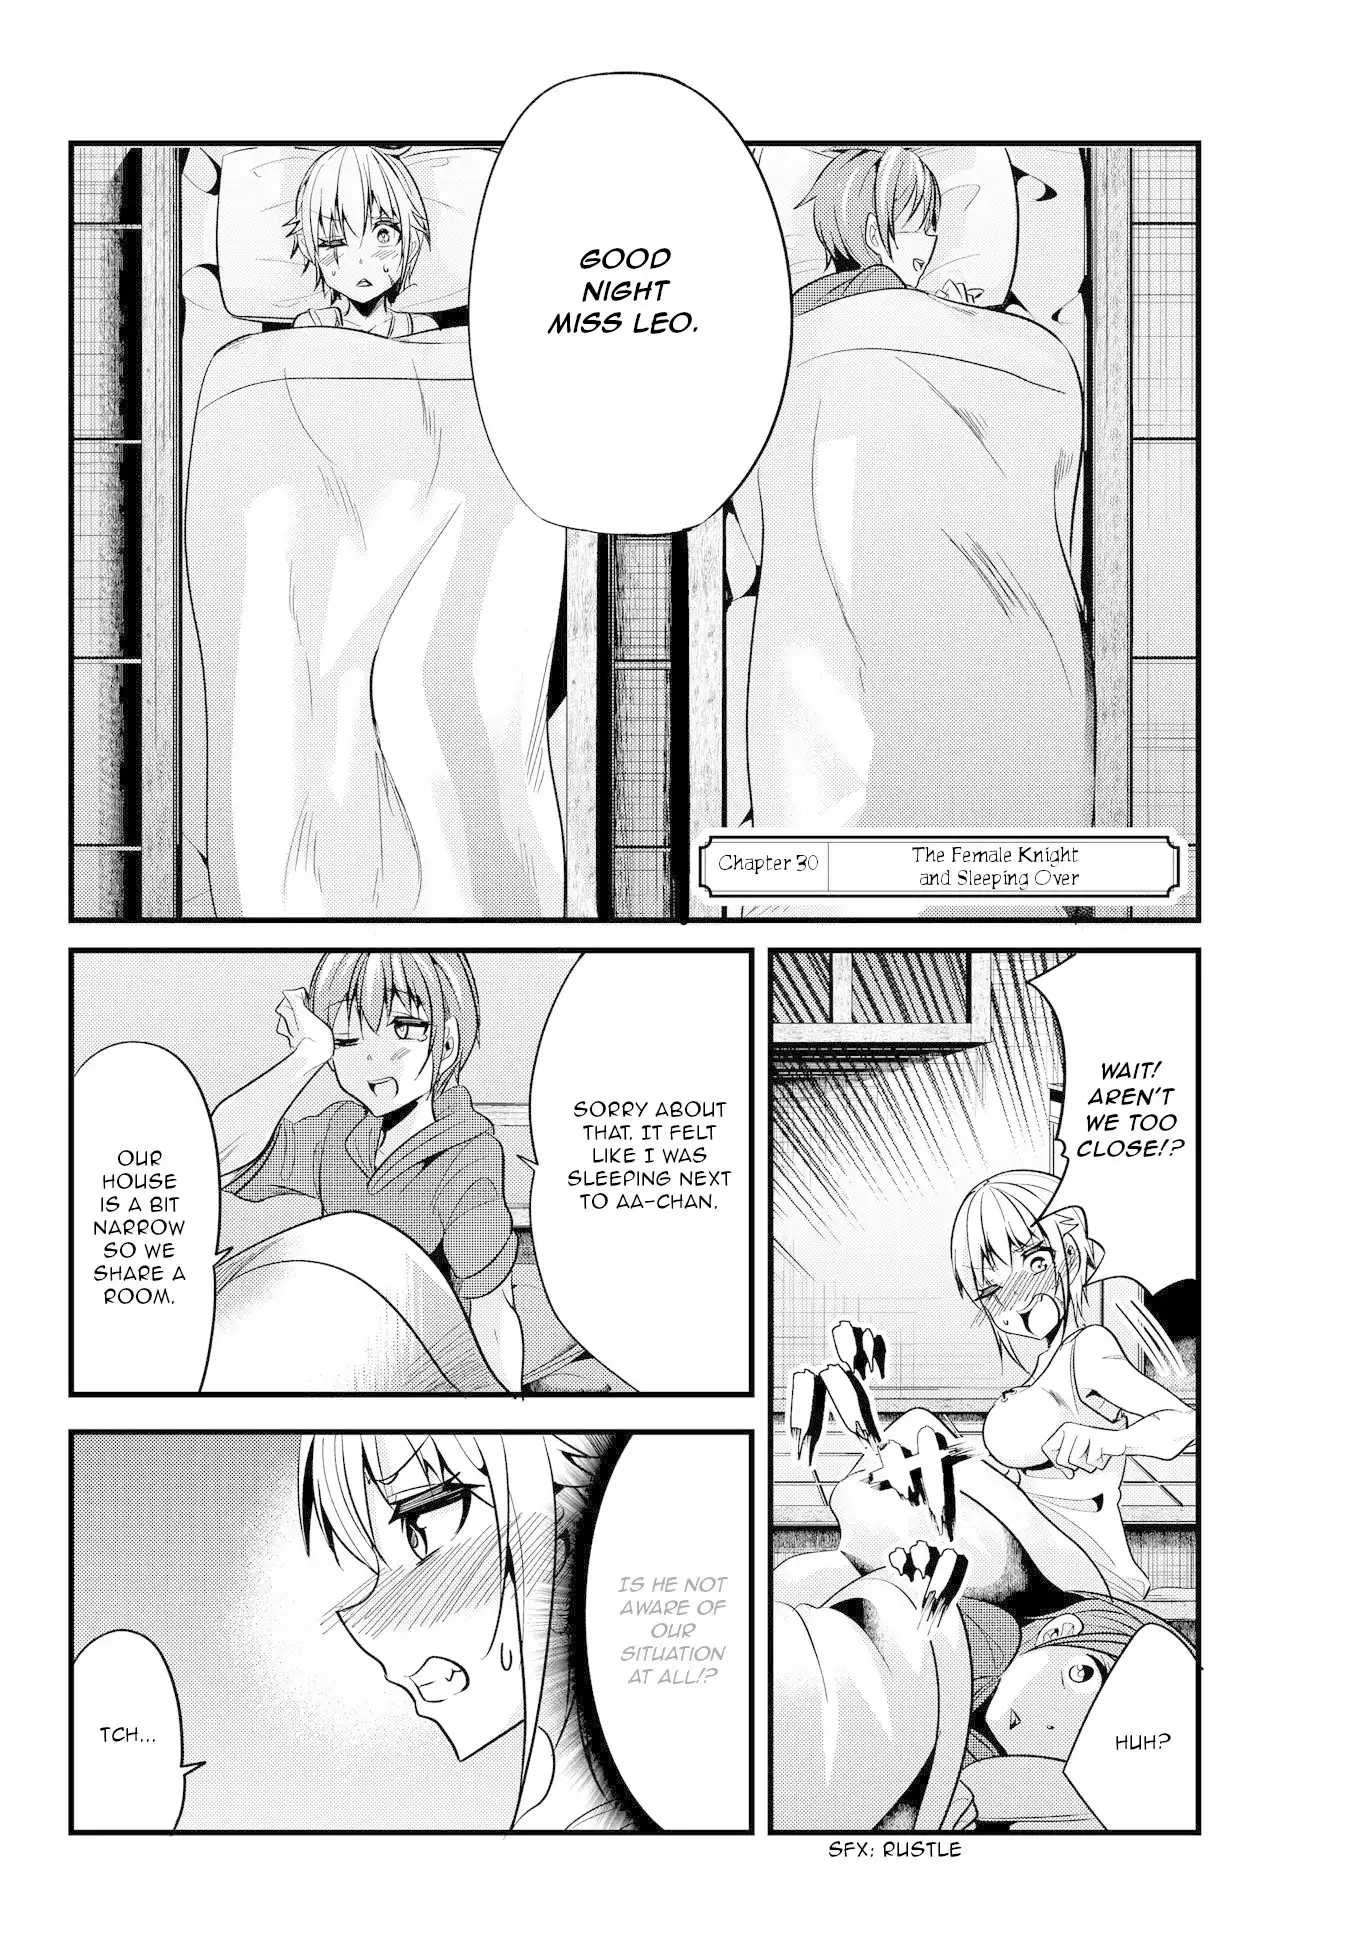 A Story About Treating a Female Knight, Who Has Never Been Treated as a Woman, as a Woman - Chapter 30 Page 2